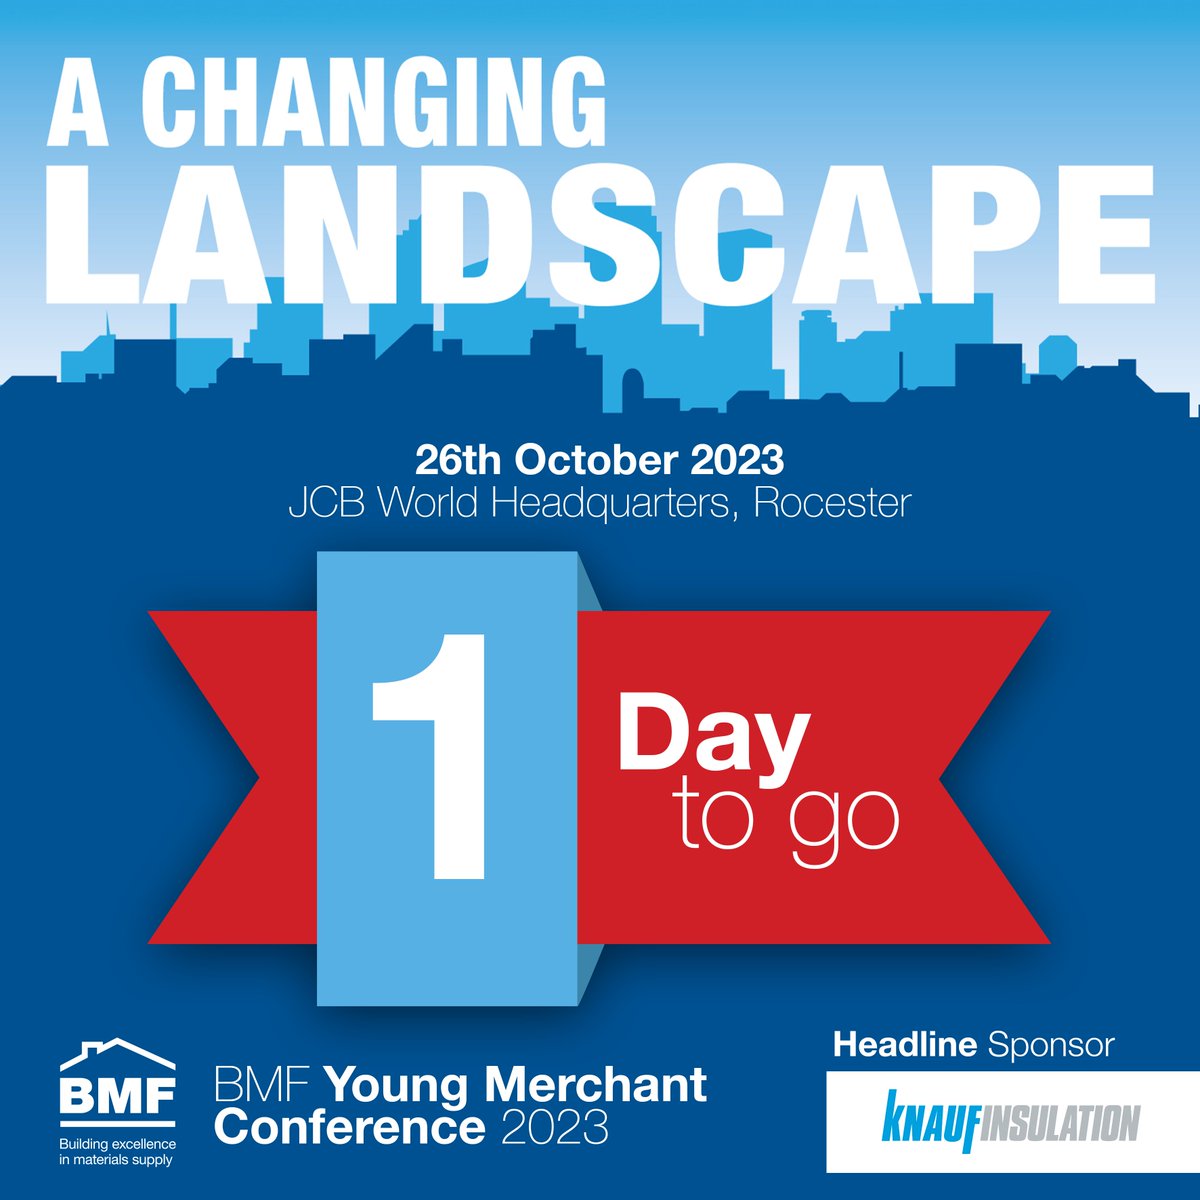 Tomorrow is the day! The BMF Young Merchants' Conference 2023 awaits. If you haven't registered yet, now is the time. Elevate your career in the construction industry. Register here: bit.ly/3PN6kd2 #BMFYoungMerchants #NetworkingEvent